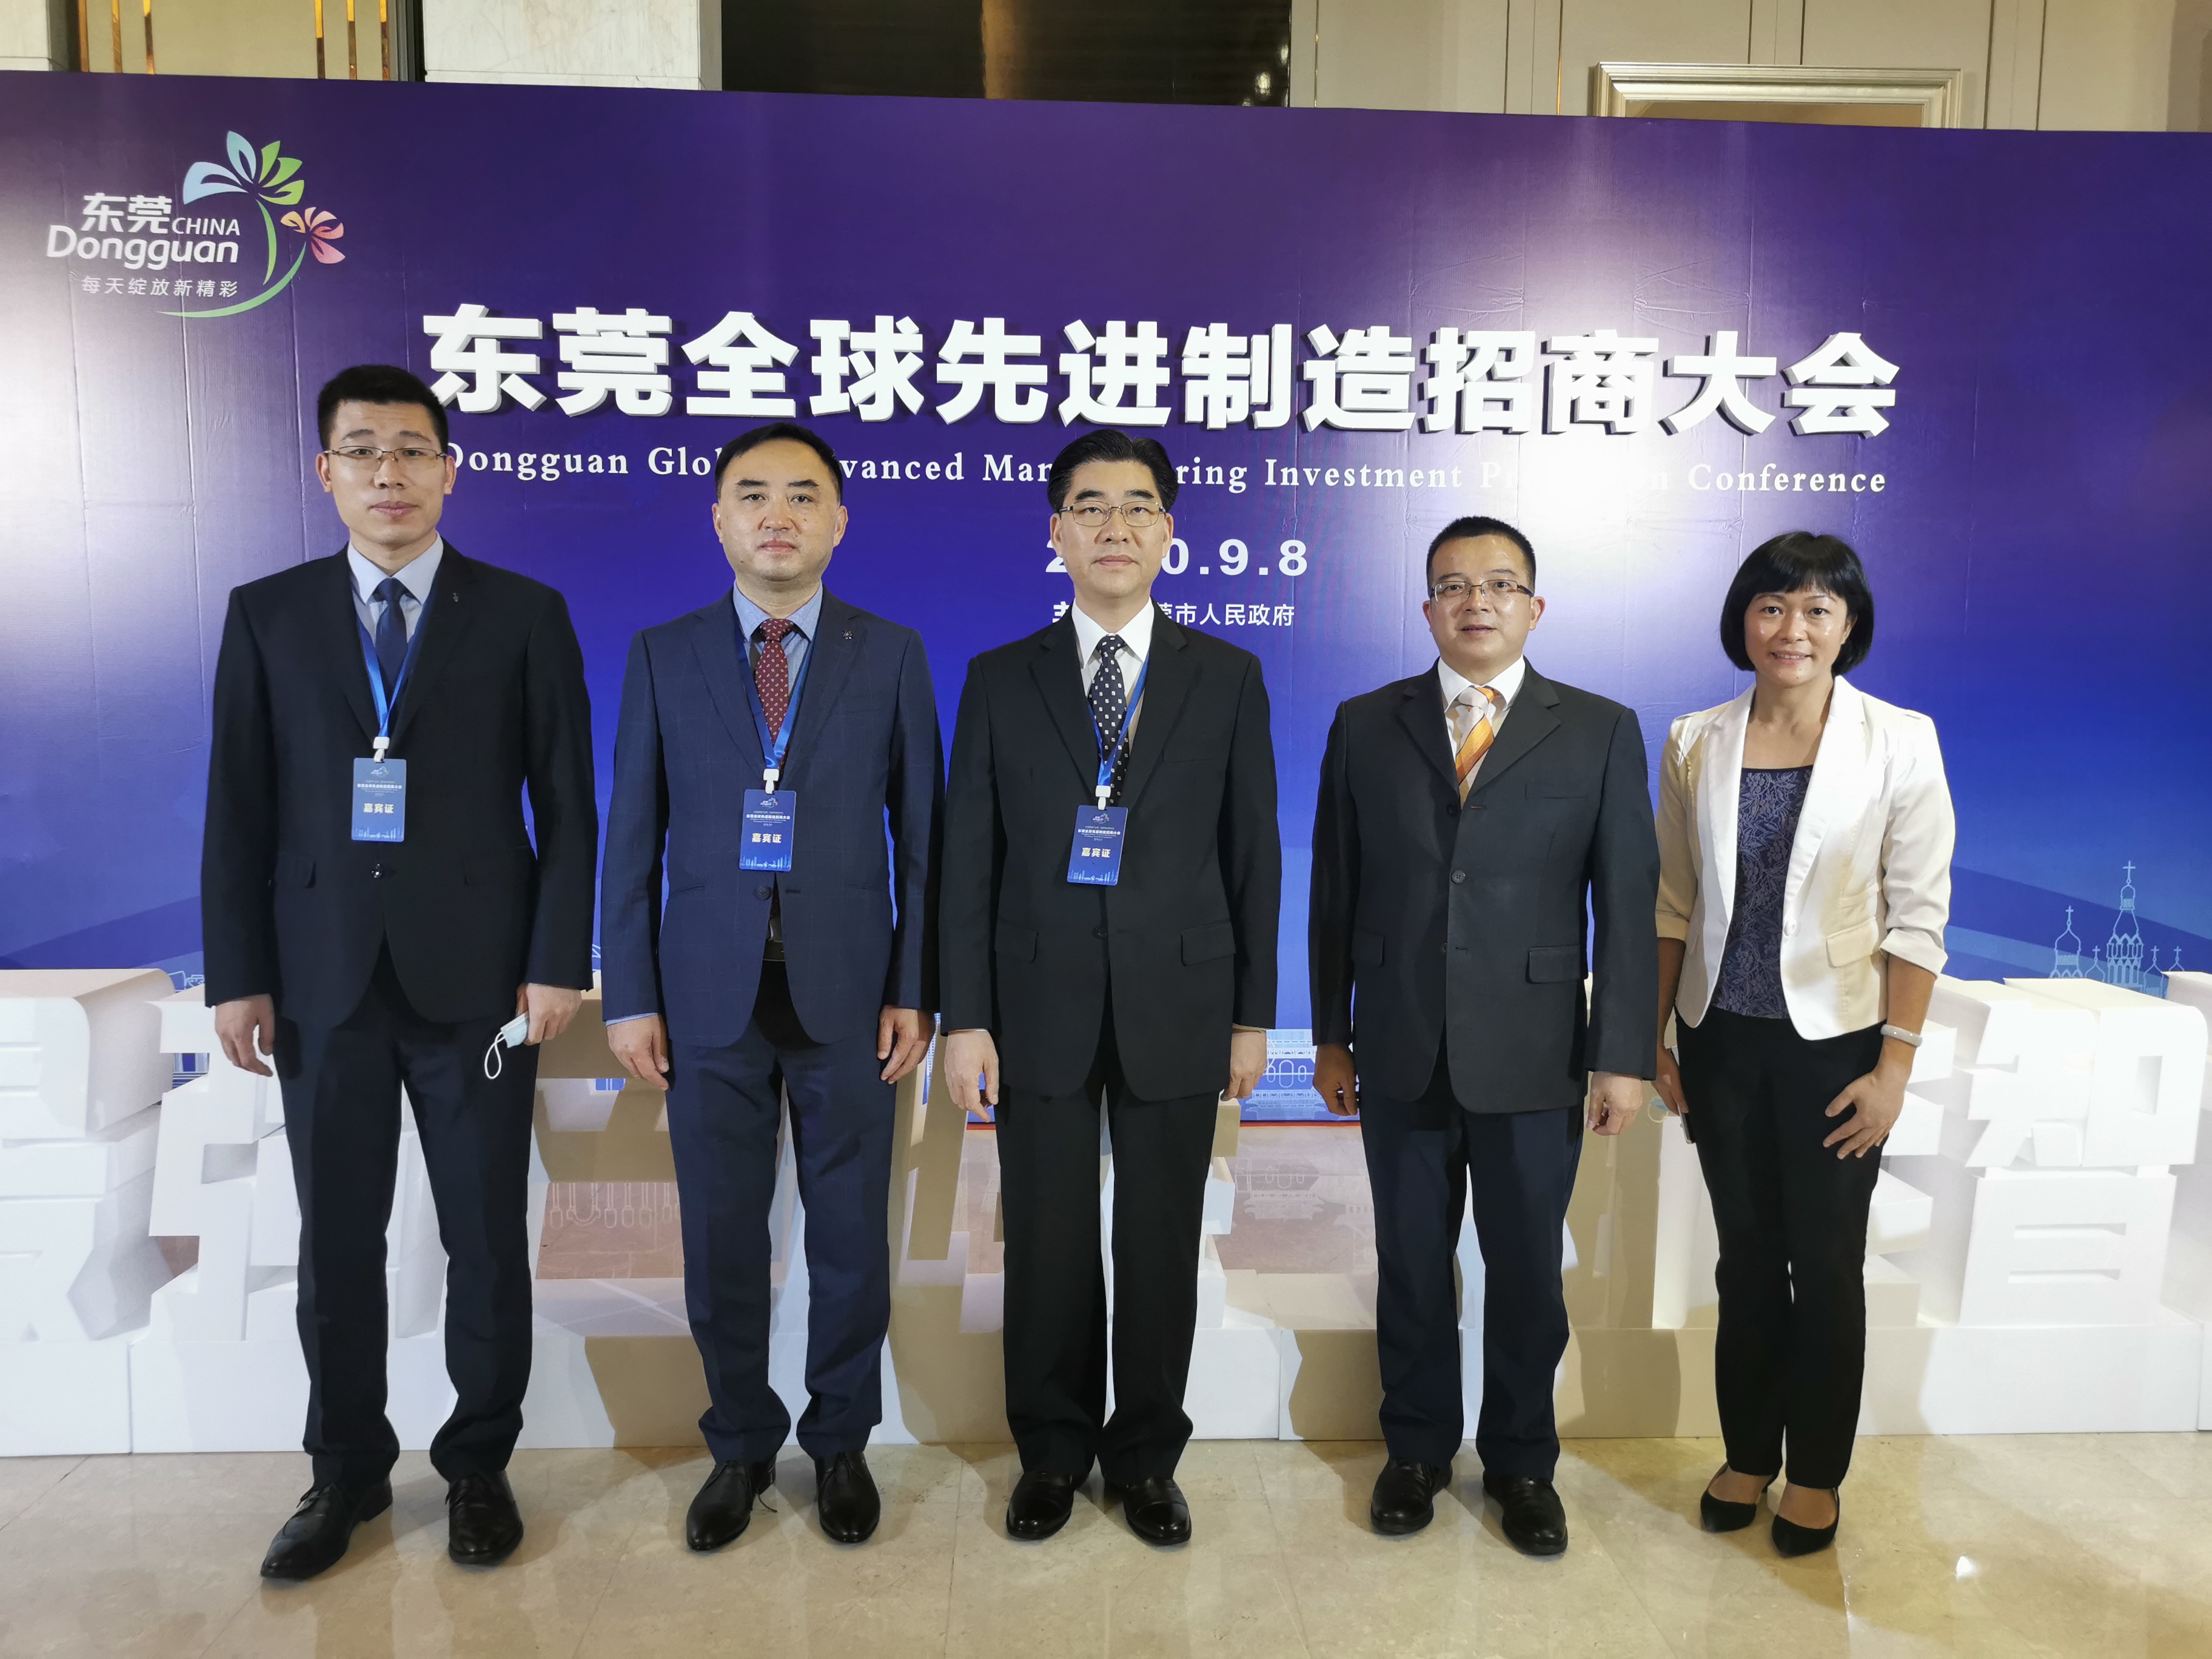 Empowering Intelligence to Create a New Era! Dongguan Gaopu invested 600 million yuan to build precision fixture equipment for Yonggu